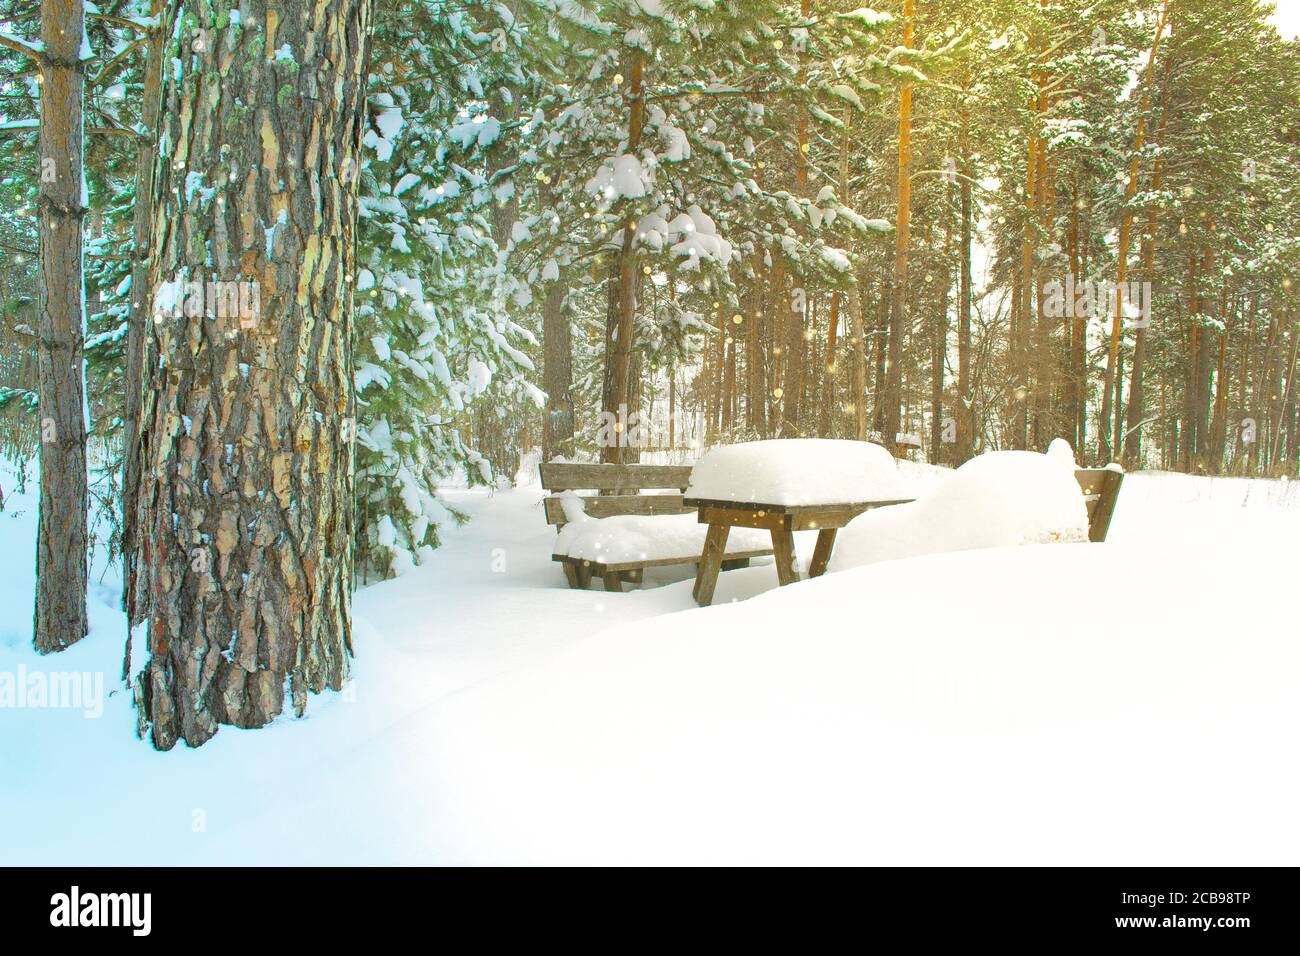 Benches and a table under a snow cap in a winter Pine forest. Christmas card with a winter mood Stock Photo